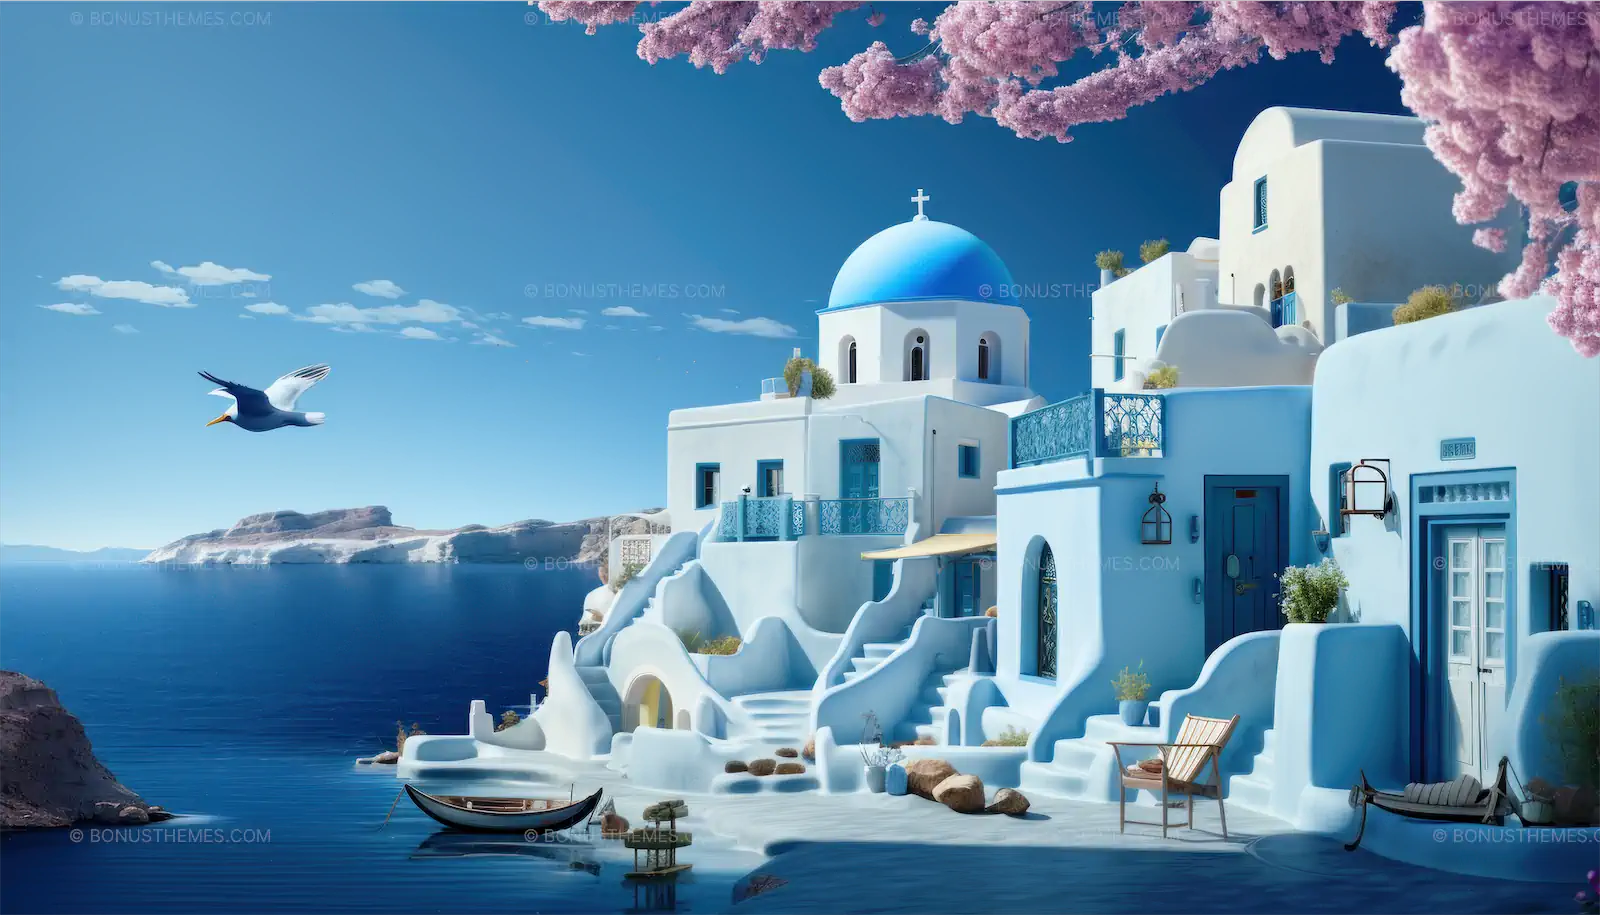 Captivating Santorini seascape, traditional charm, azure waters, and bougainvillea beauty